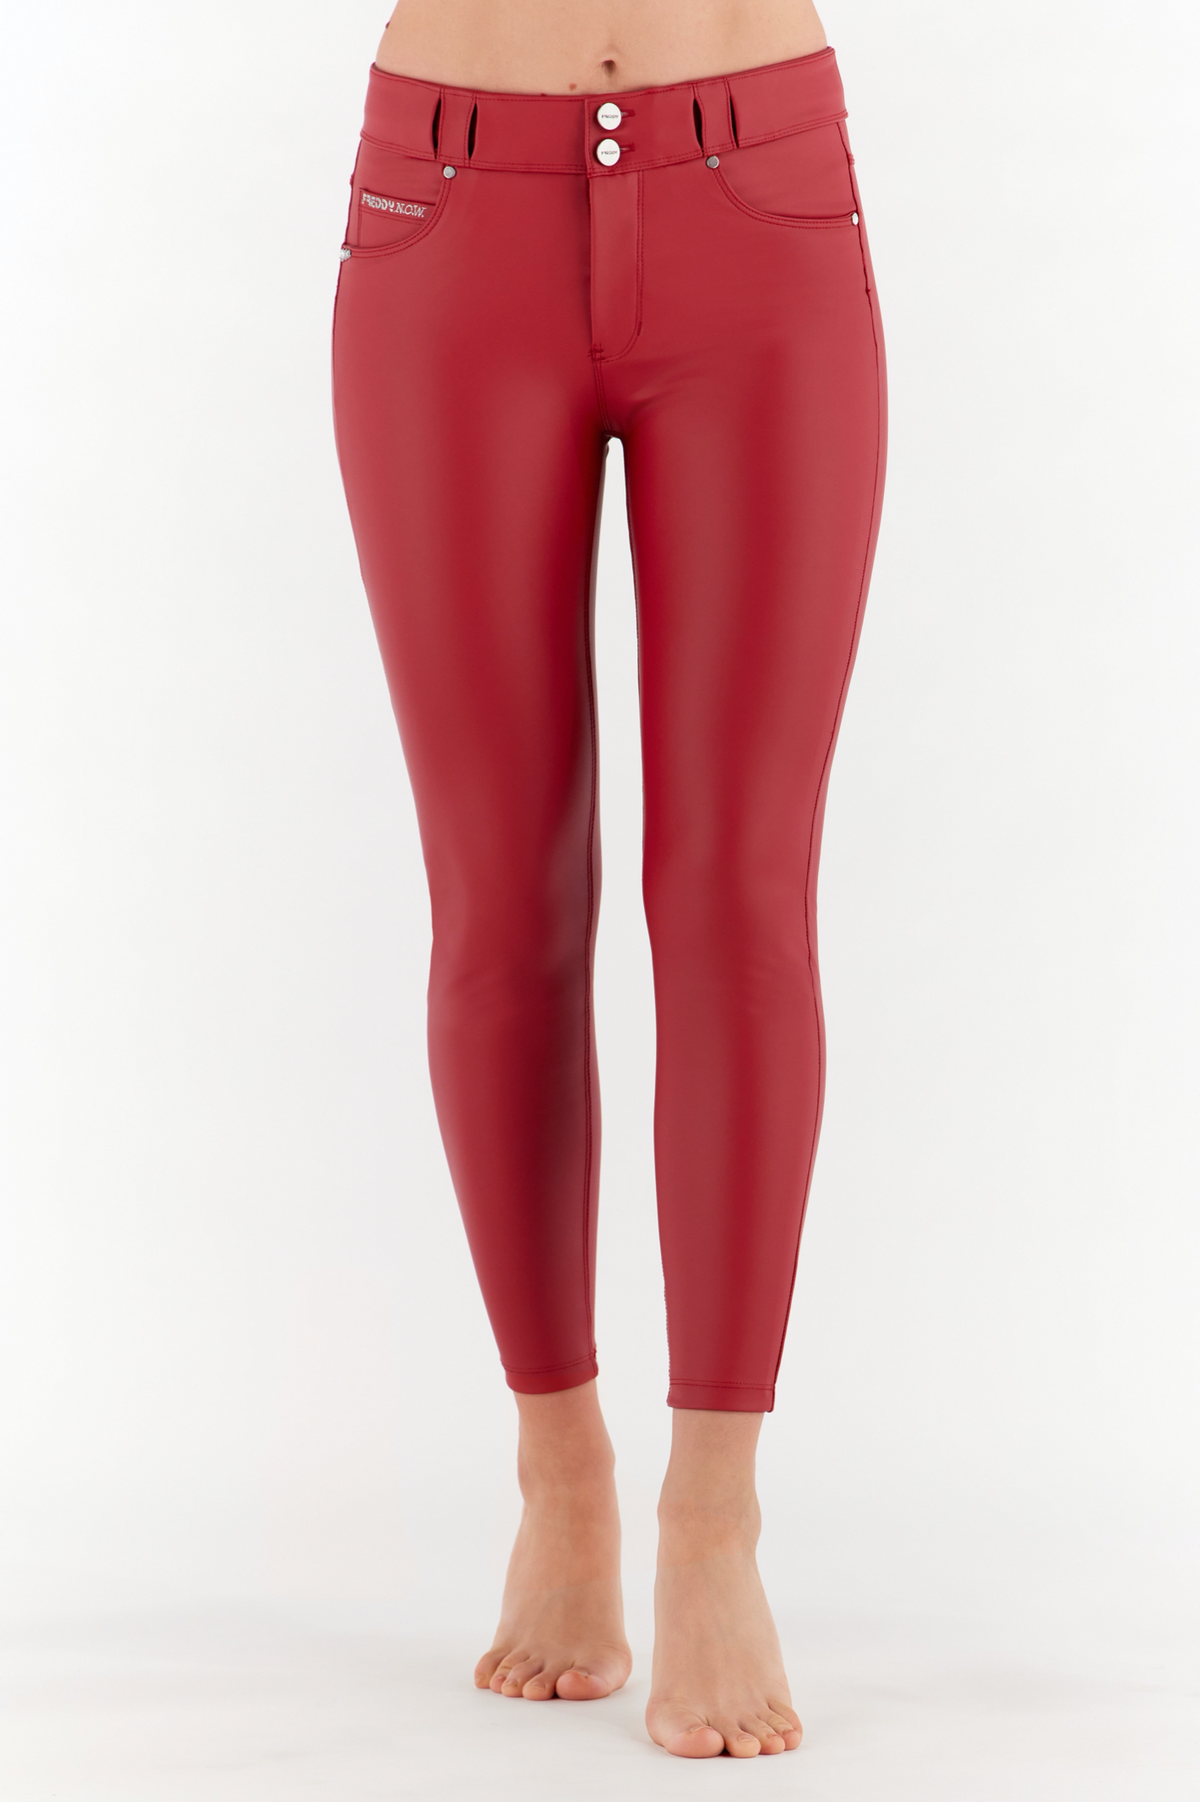 red faux leather NOW freddy pants